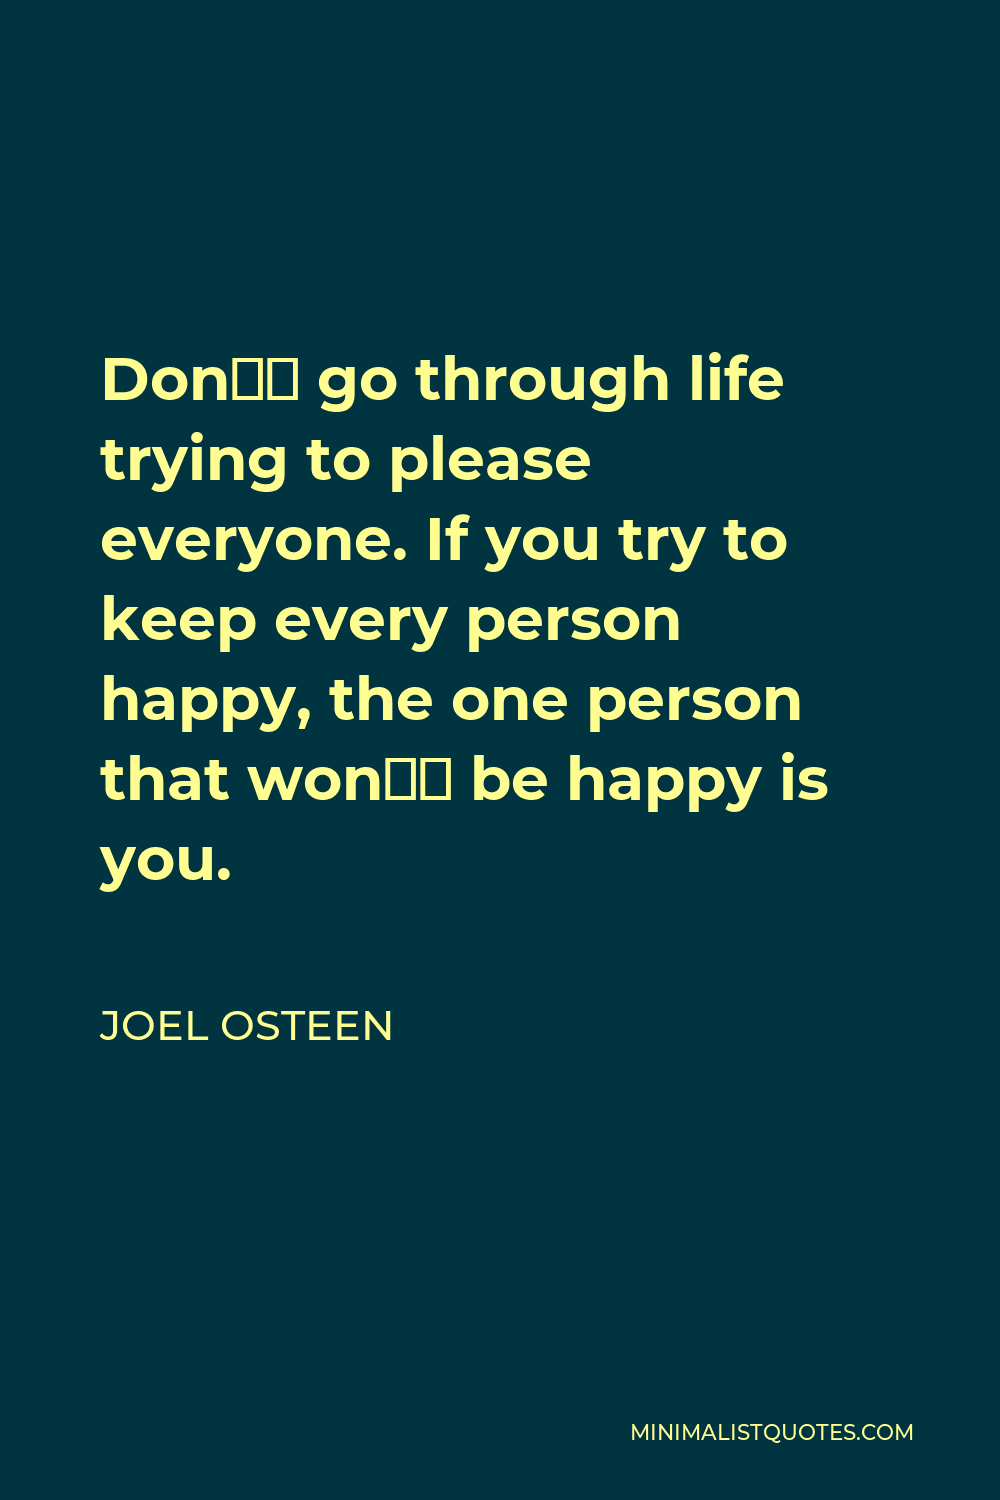 Joel Osteen Quote - Don’t go through life trying to please everyone. If you try to keep every person happy, the one person that won’t be happy is you.